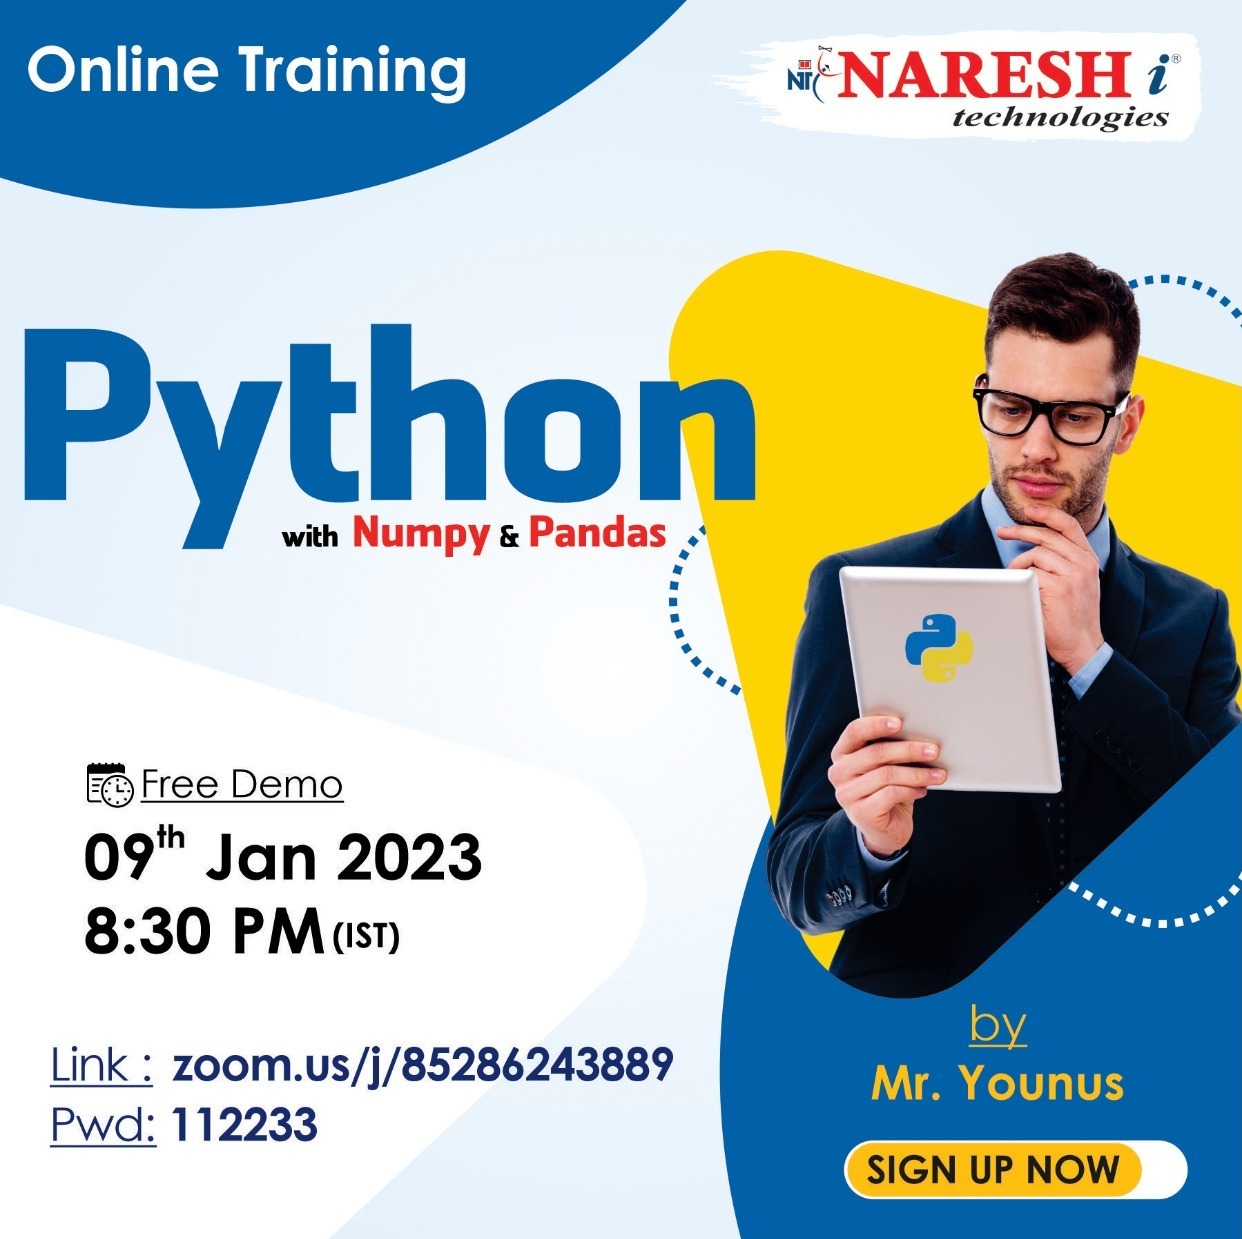 Attend Free Demo On Python 9th January @ 08:30 PM by Mr. Younus, Online Event